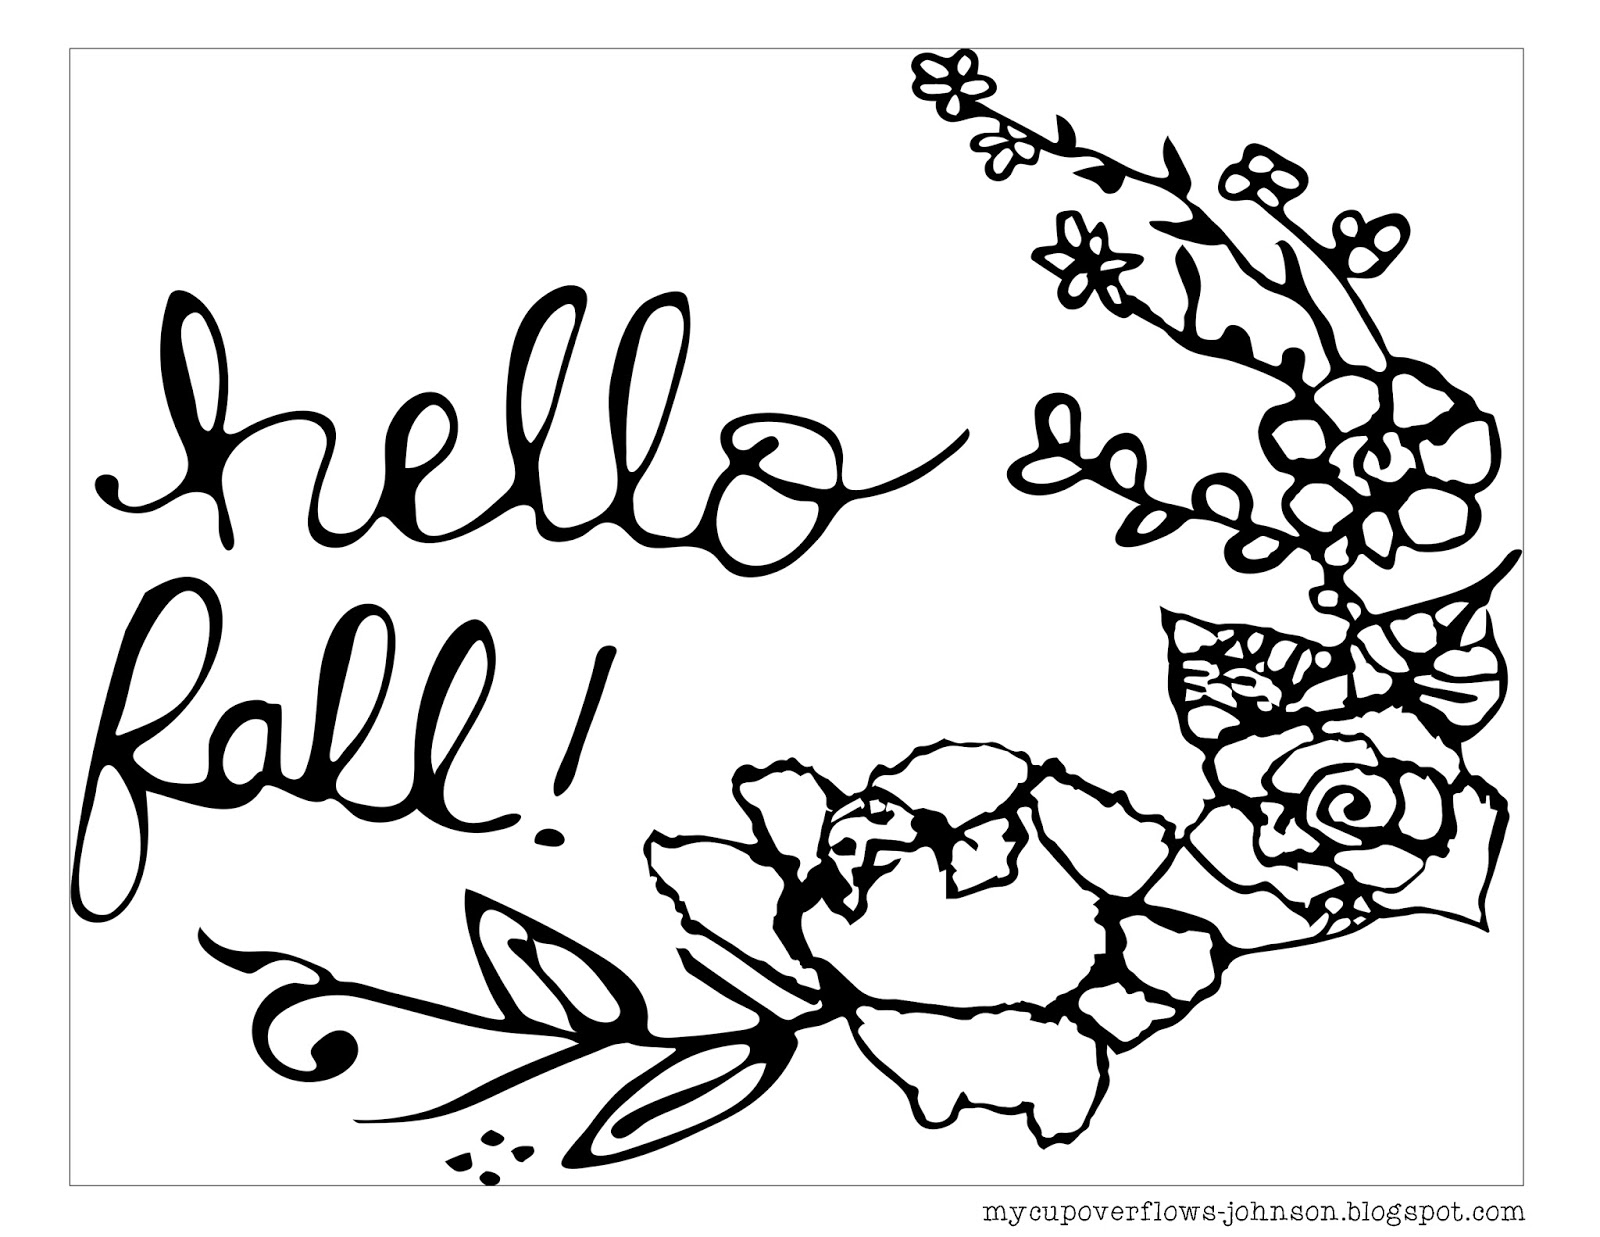 Download My Cup Overflows: Fall Coloring Pages